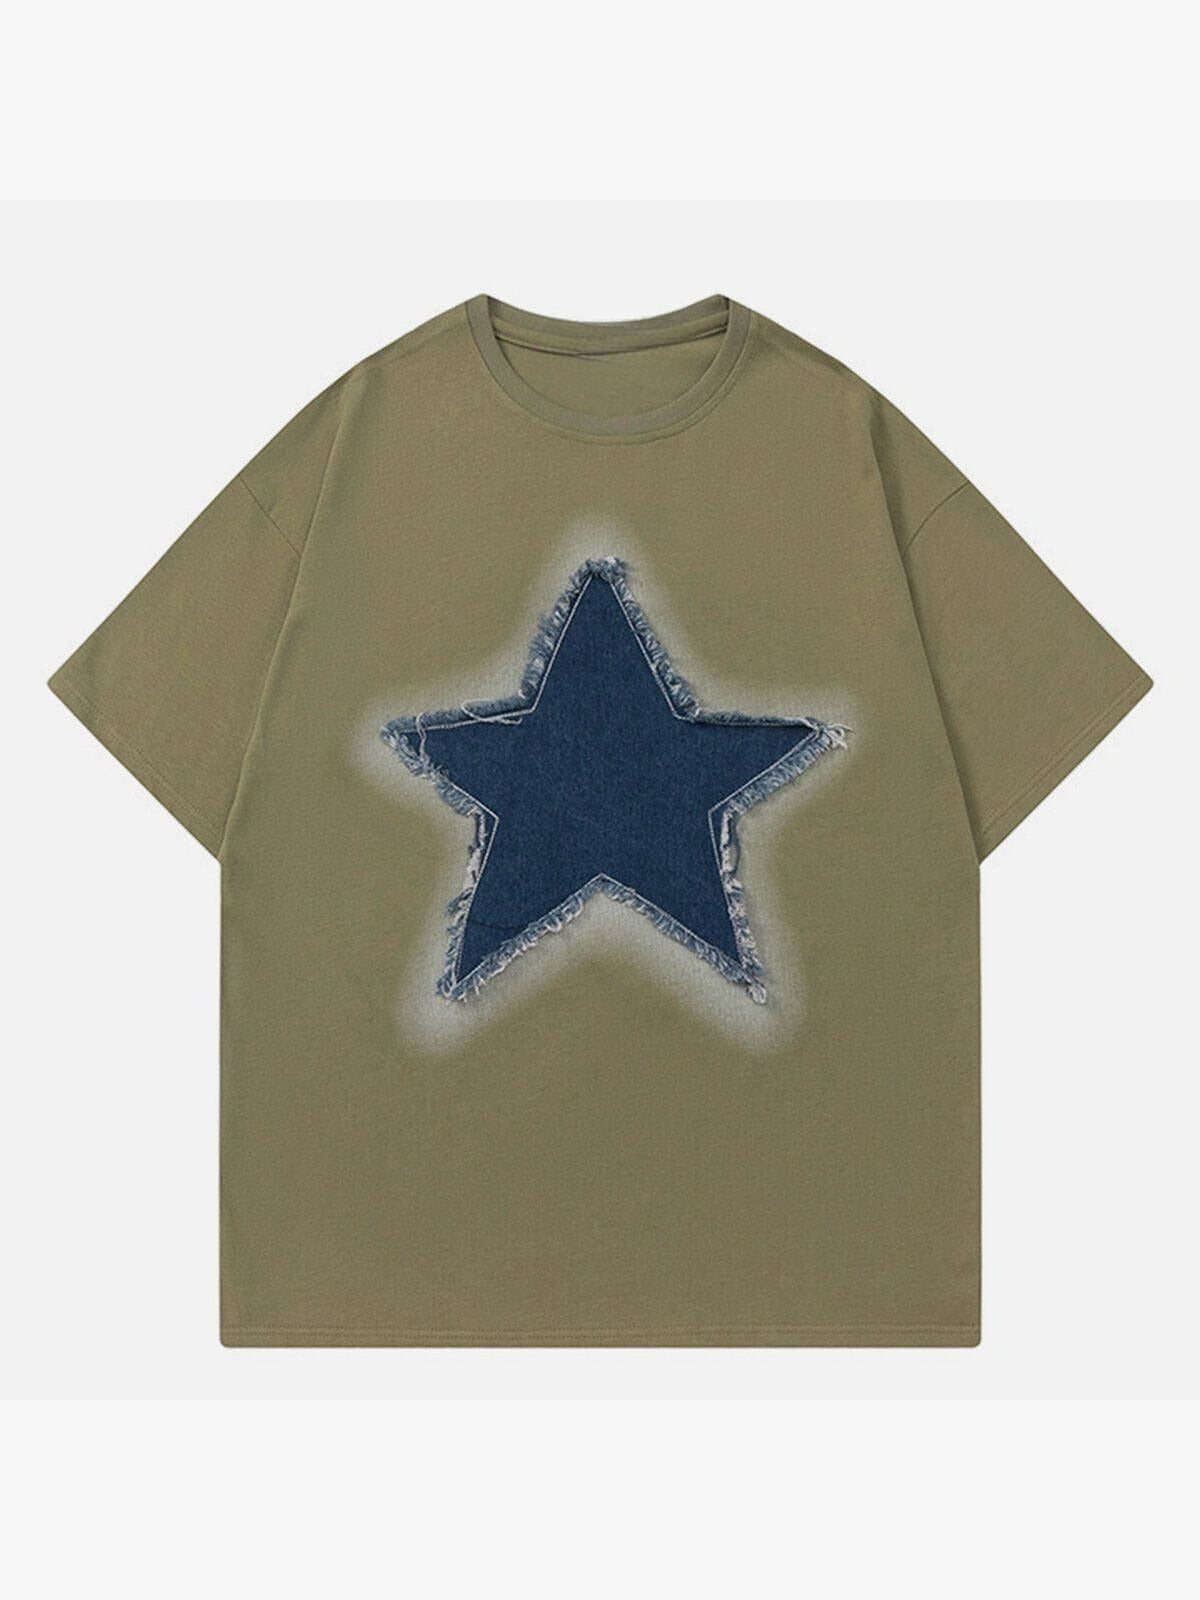 WLS Embroidery Denim Star Tee